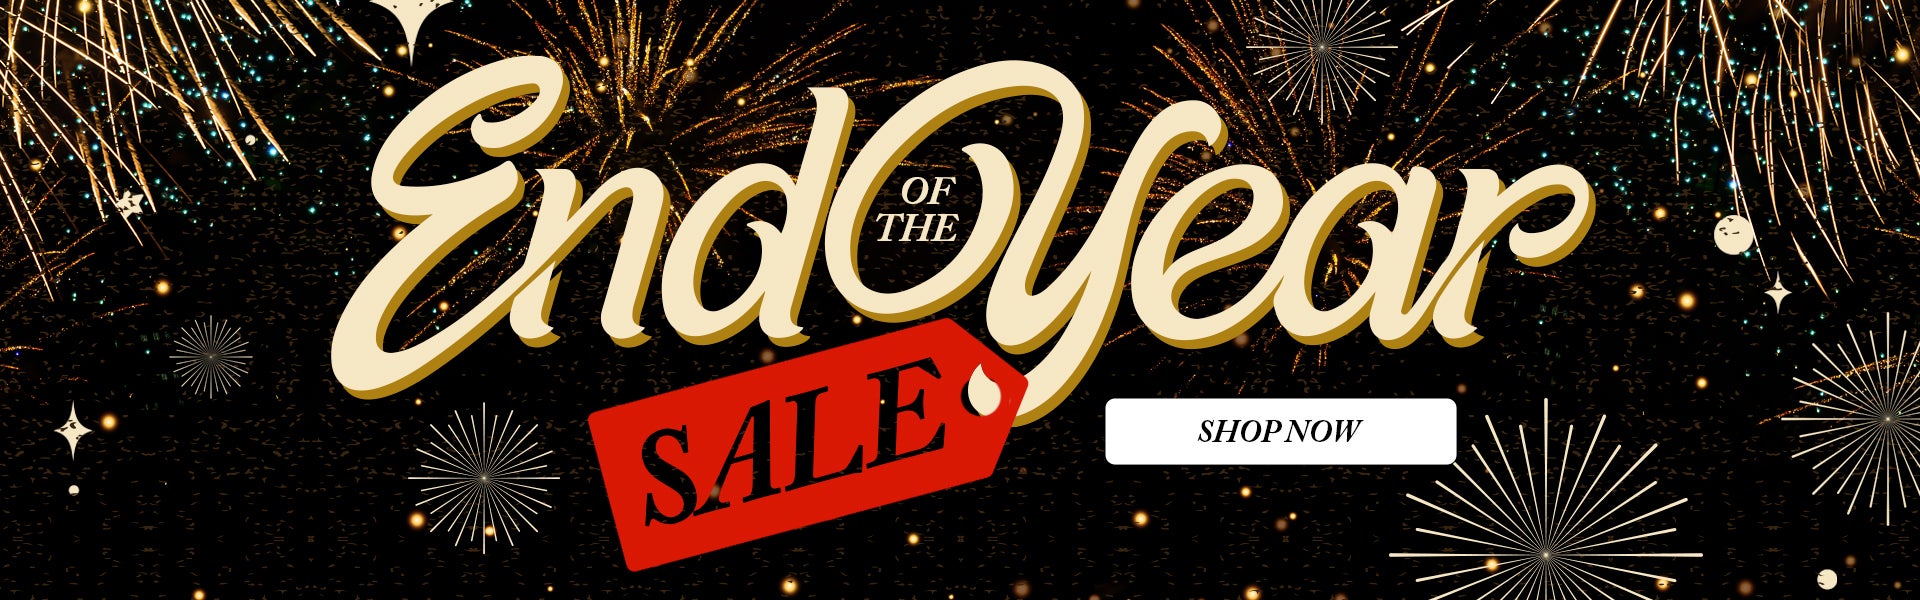 End of the year sale